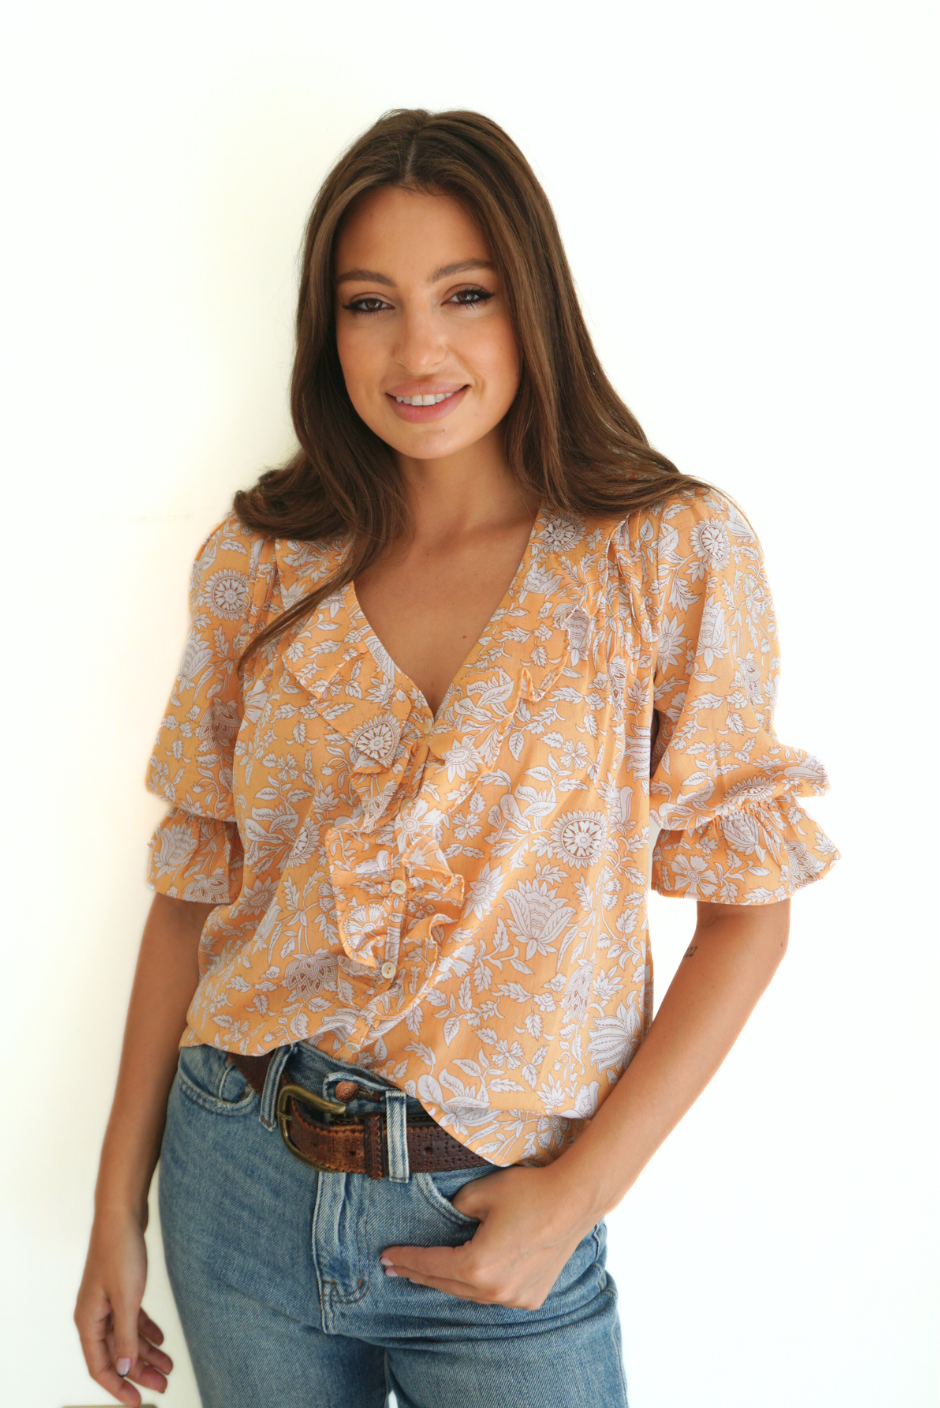 Light Orange Floral Spring/Summer Chloe Shirt from Paneros Clothing with button-up front and Elbow-length sleeves and ruffles. Sustainable cotton fully-lined top with smocking. Front View tucked into denim.